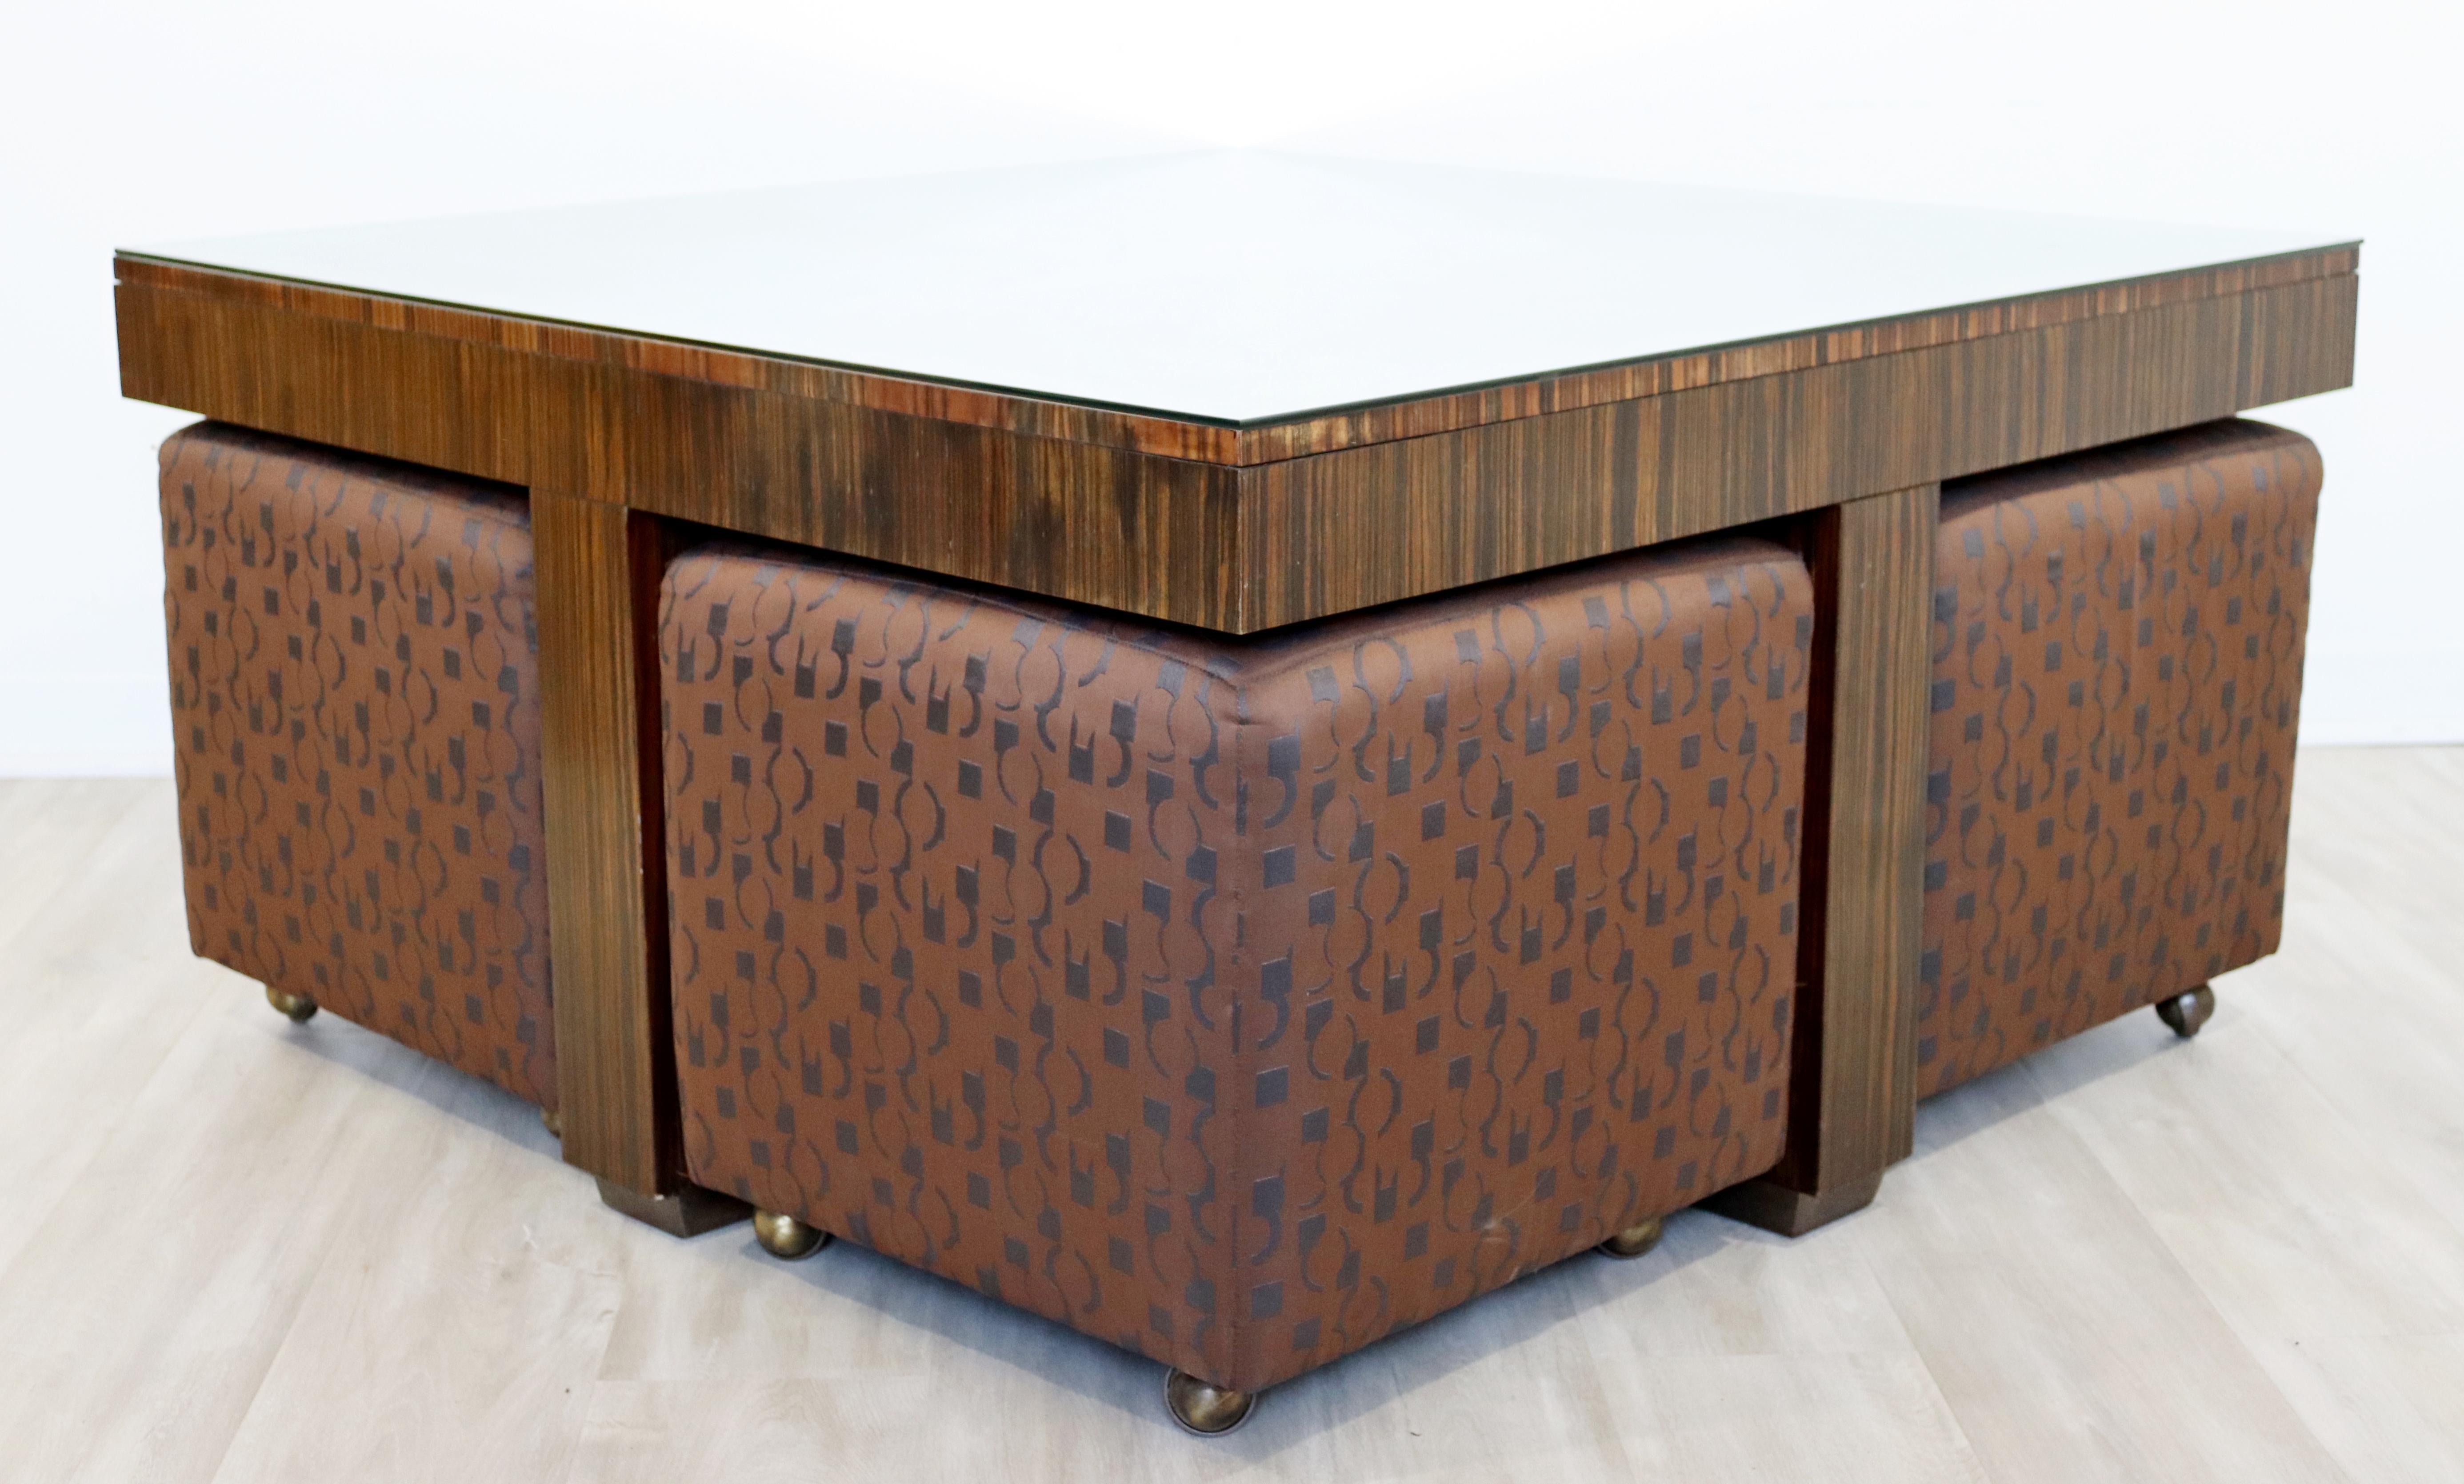 For your consideration is a dazzling, zebra wood coffee table, with a glass top and four rolling stools that fit underneath, by Henredon, circa the 1990s. In excellent vintage condition. The dimensions of the table are 44